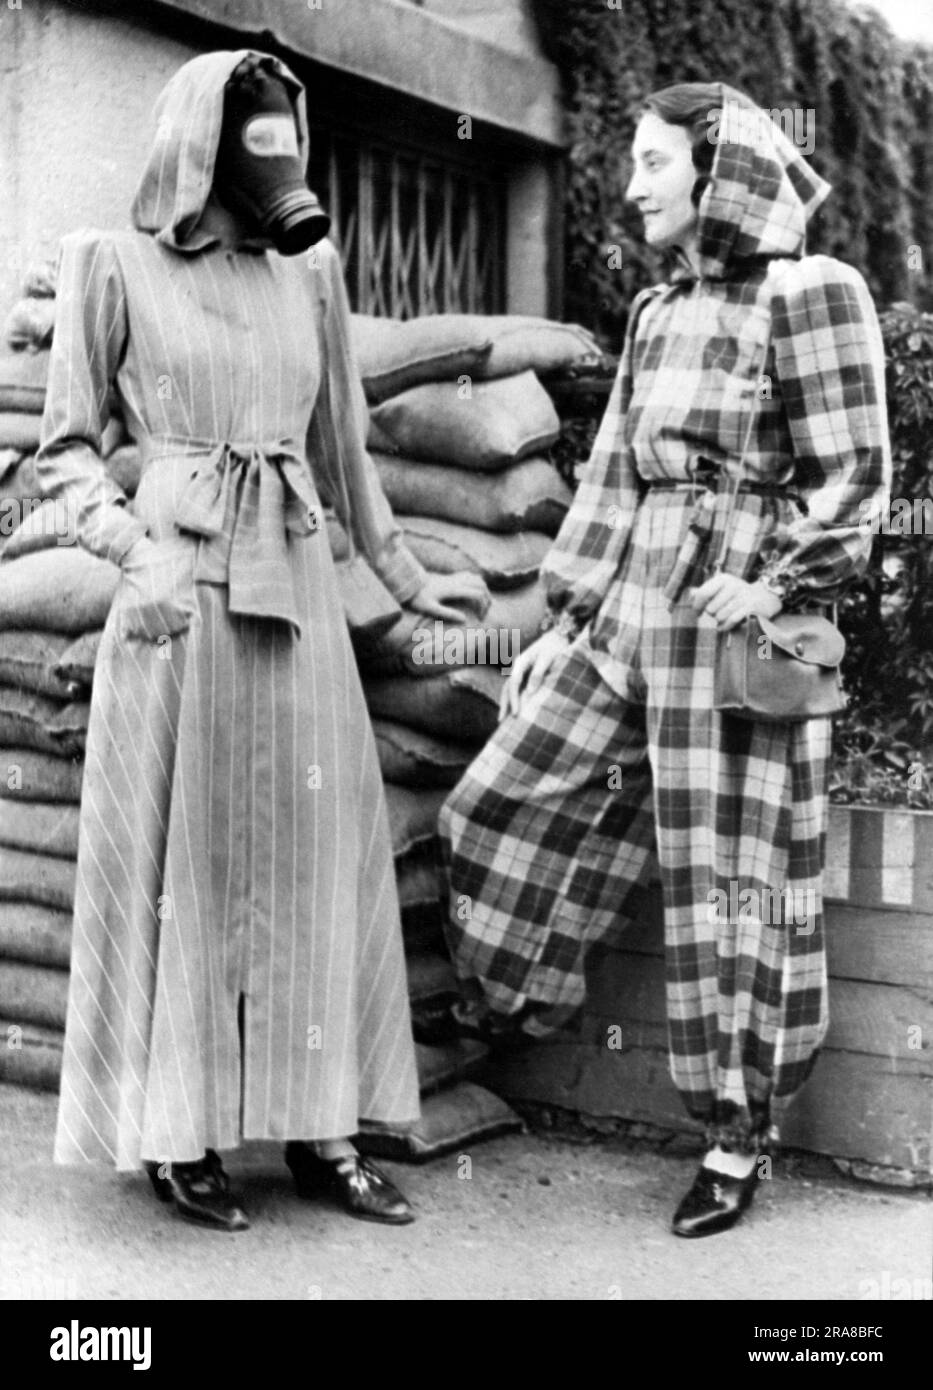 London, England:  Sept 14, 1939. The very latest fashion in air raid shelter wear is a slip on dressing gown complete with hood, and can be left open, (left), or zipped into trousers, (right). Stock Photo